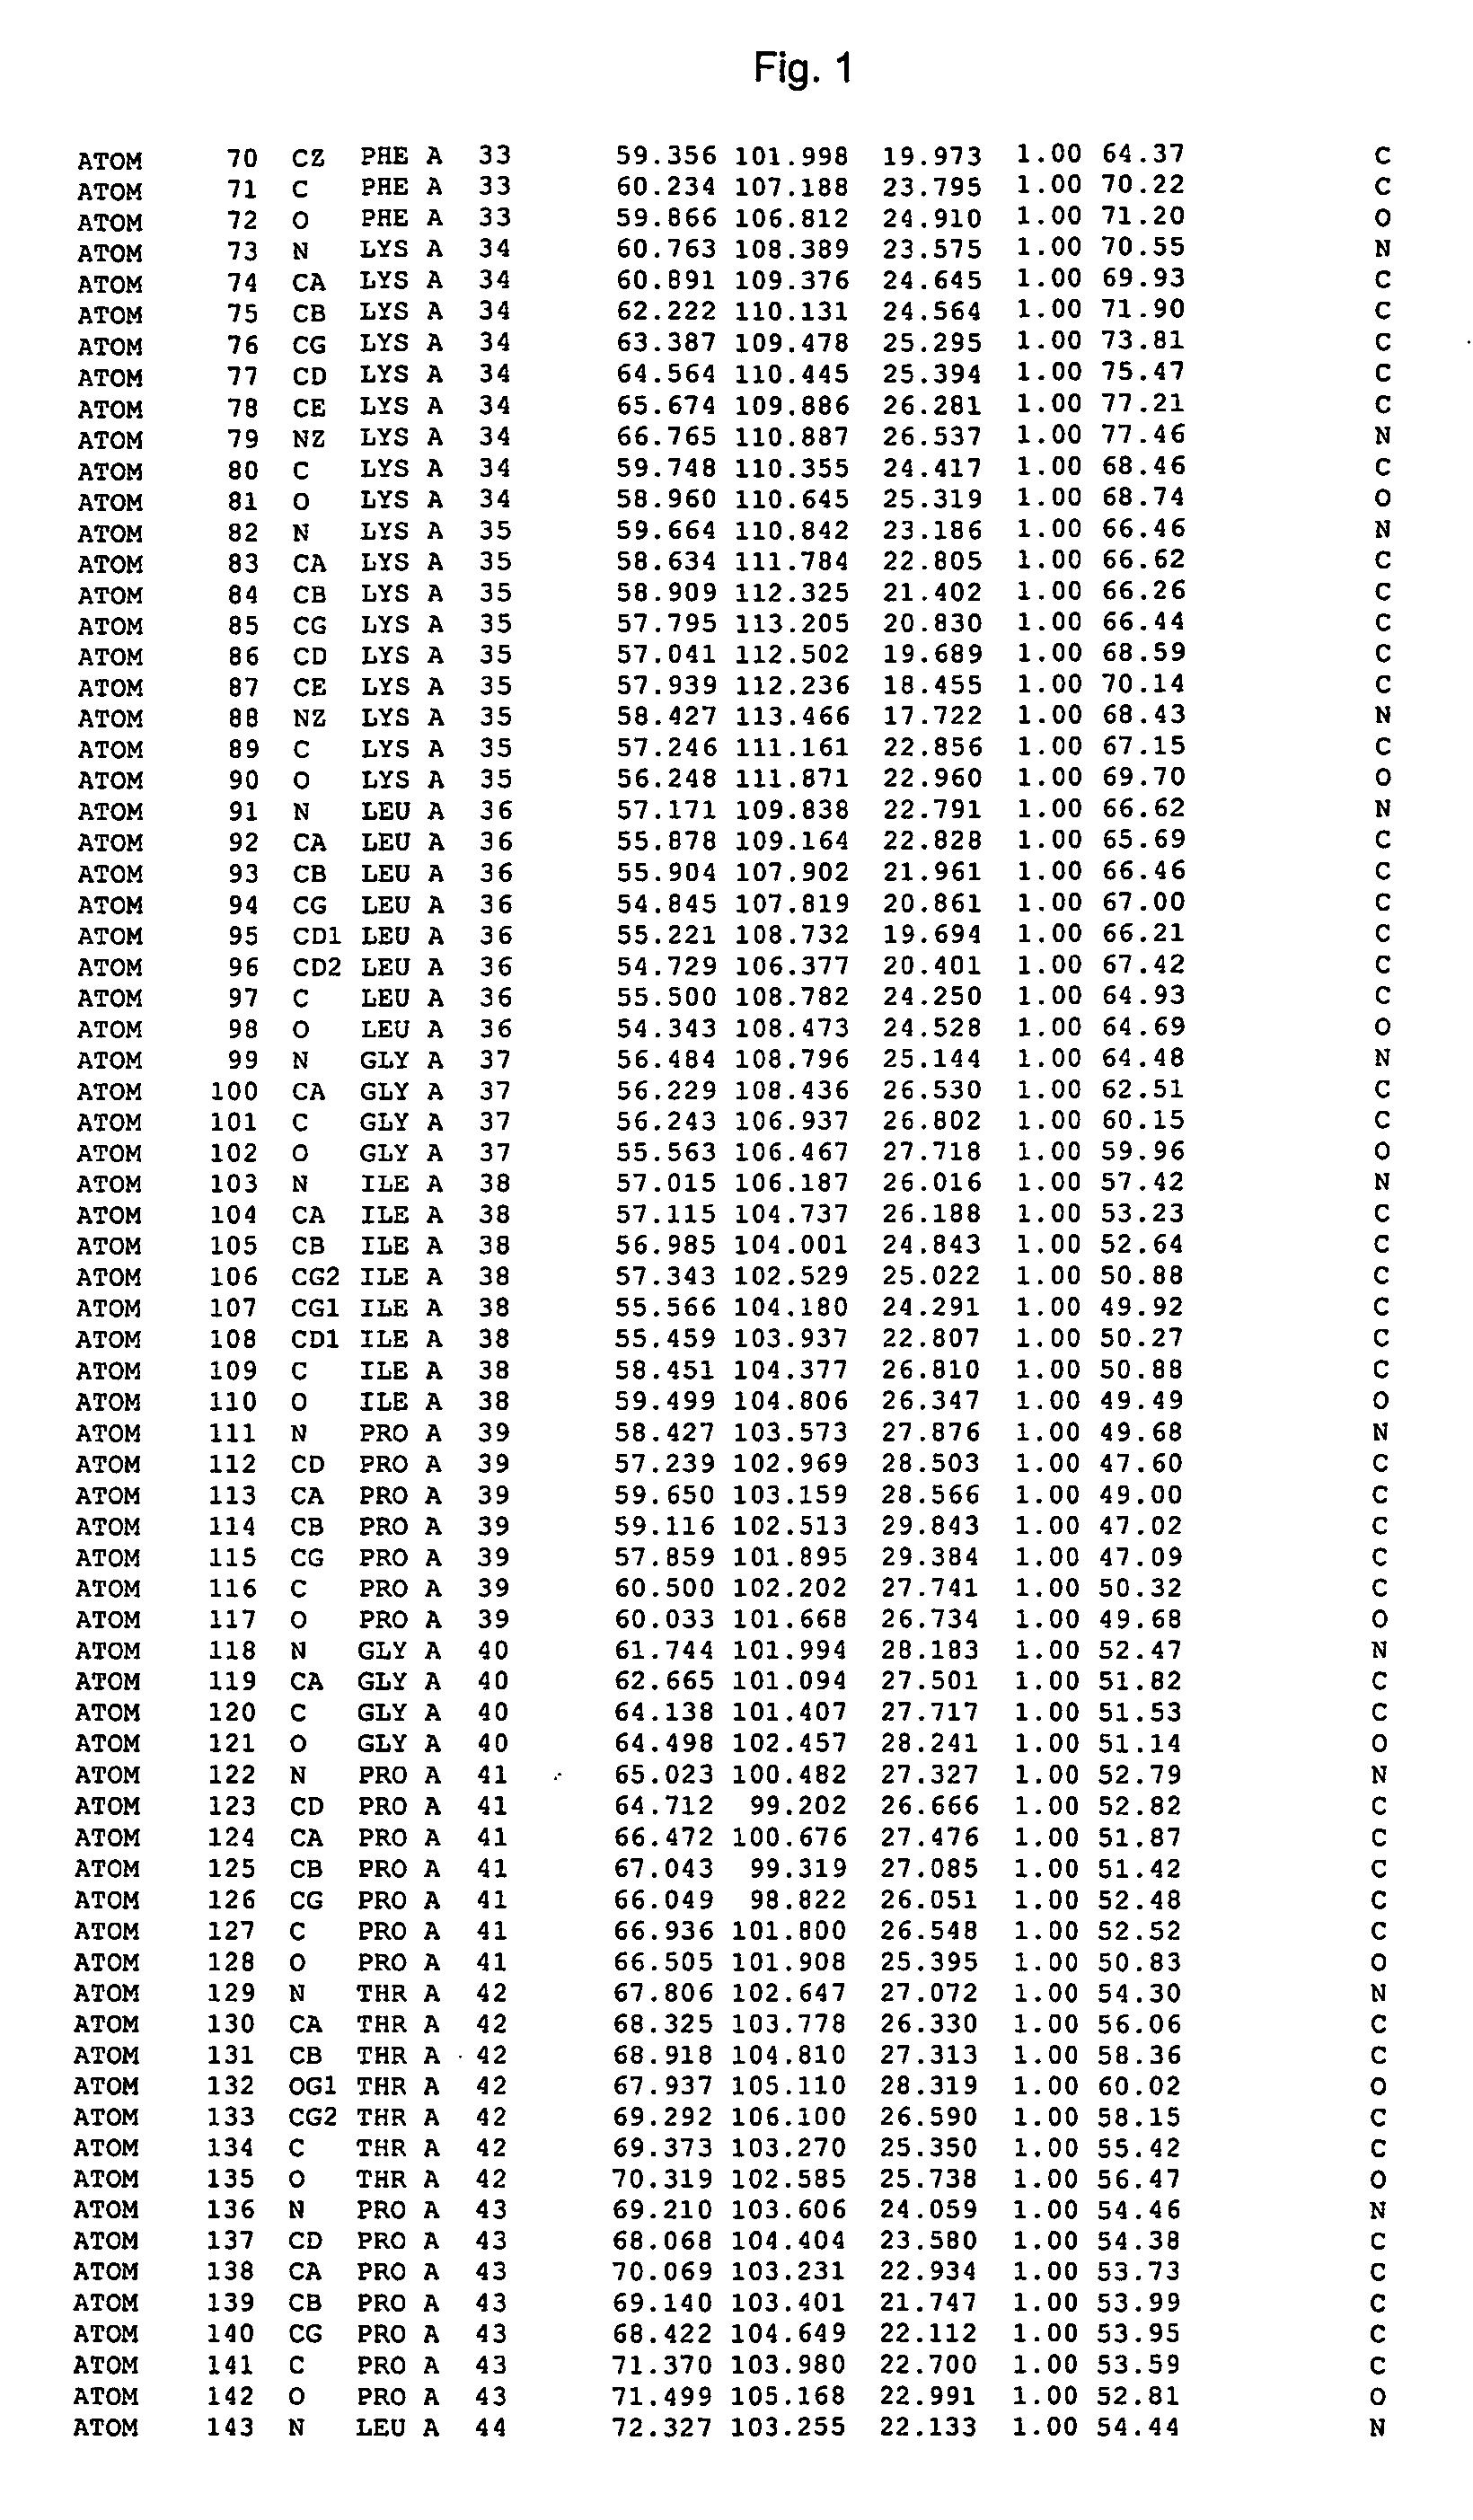 Crystal structure of cytochrome P450 3A4 and uses thereof